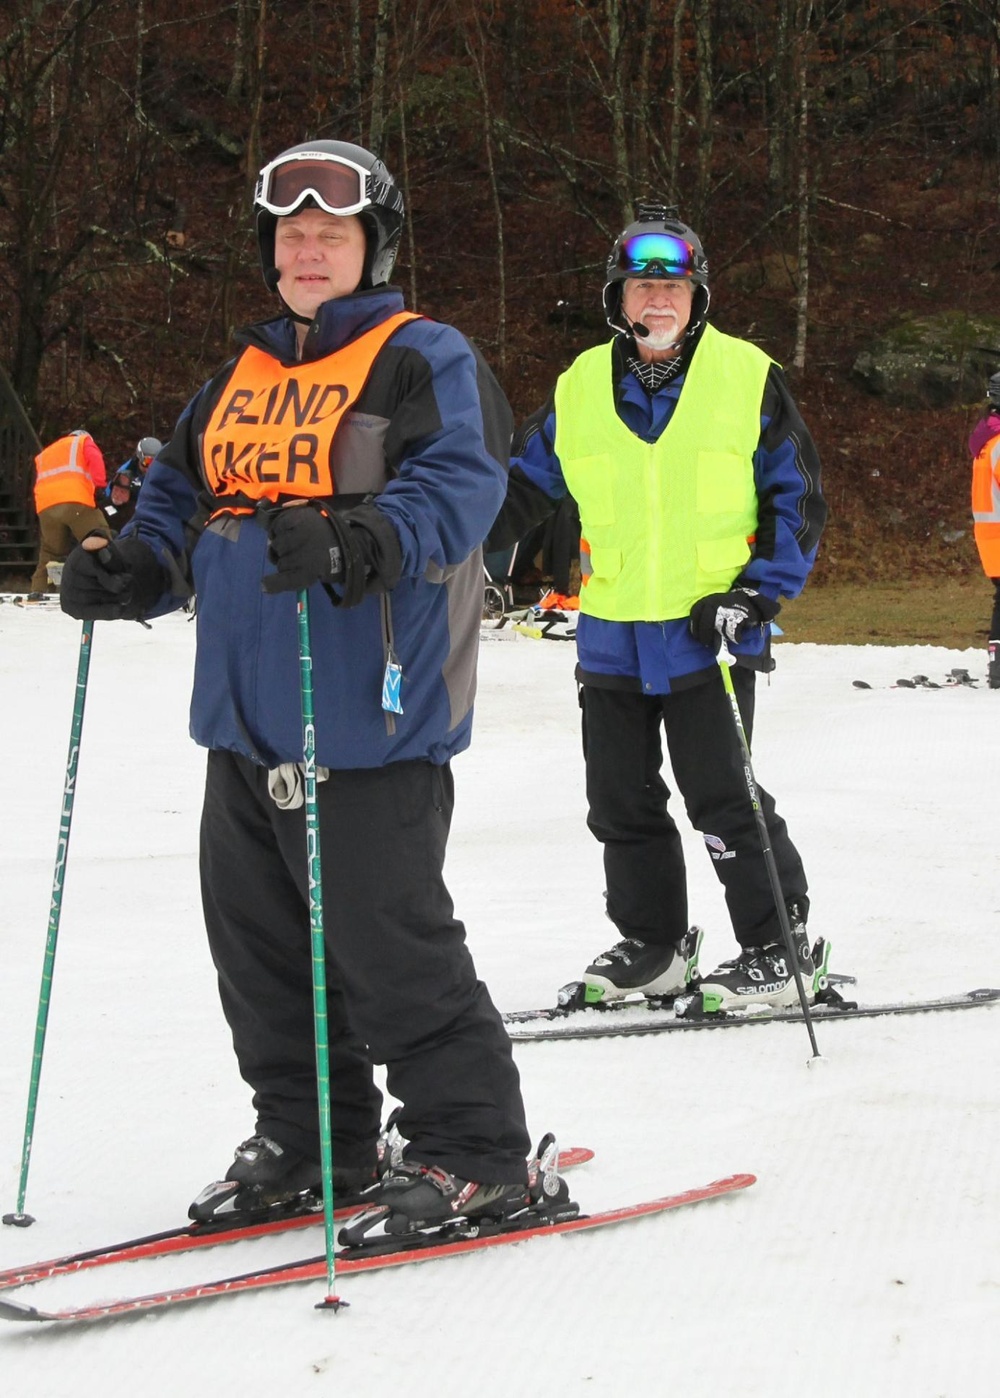 Corps employee hits the slopes to assist adaptive skiers